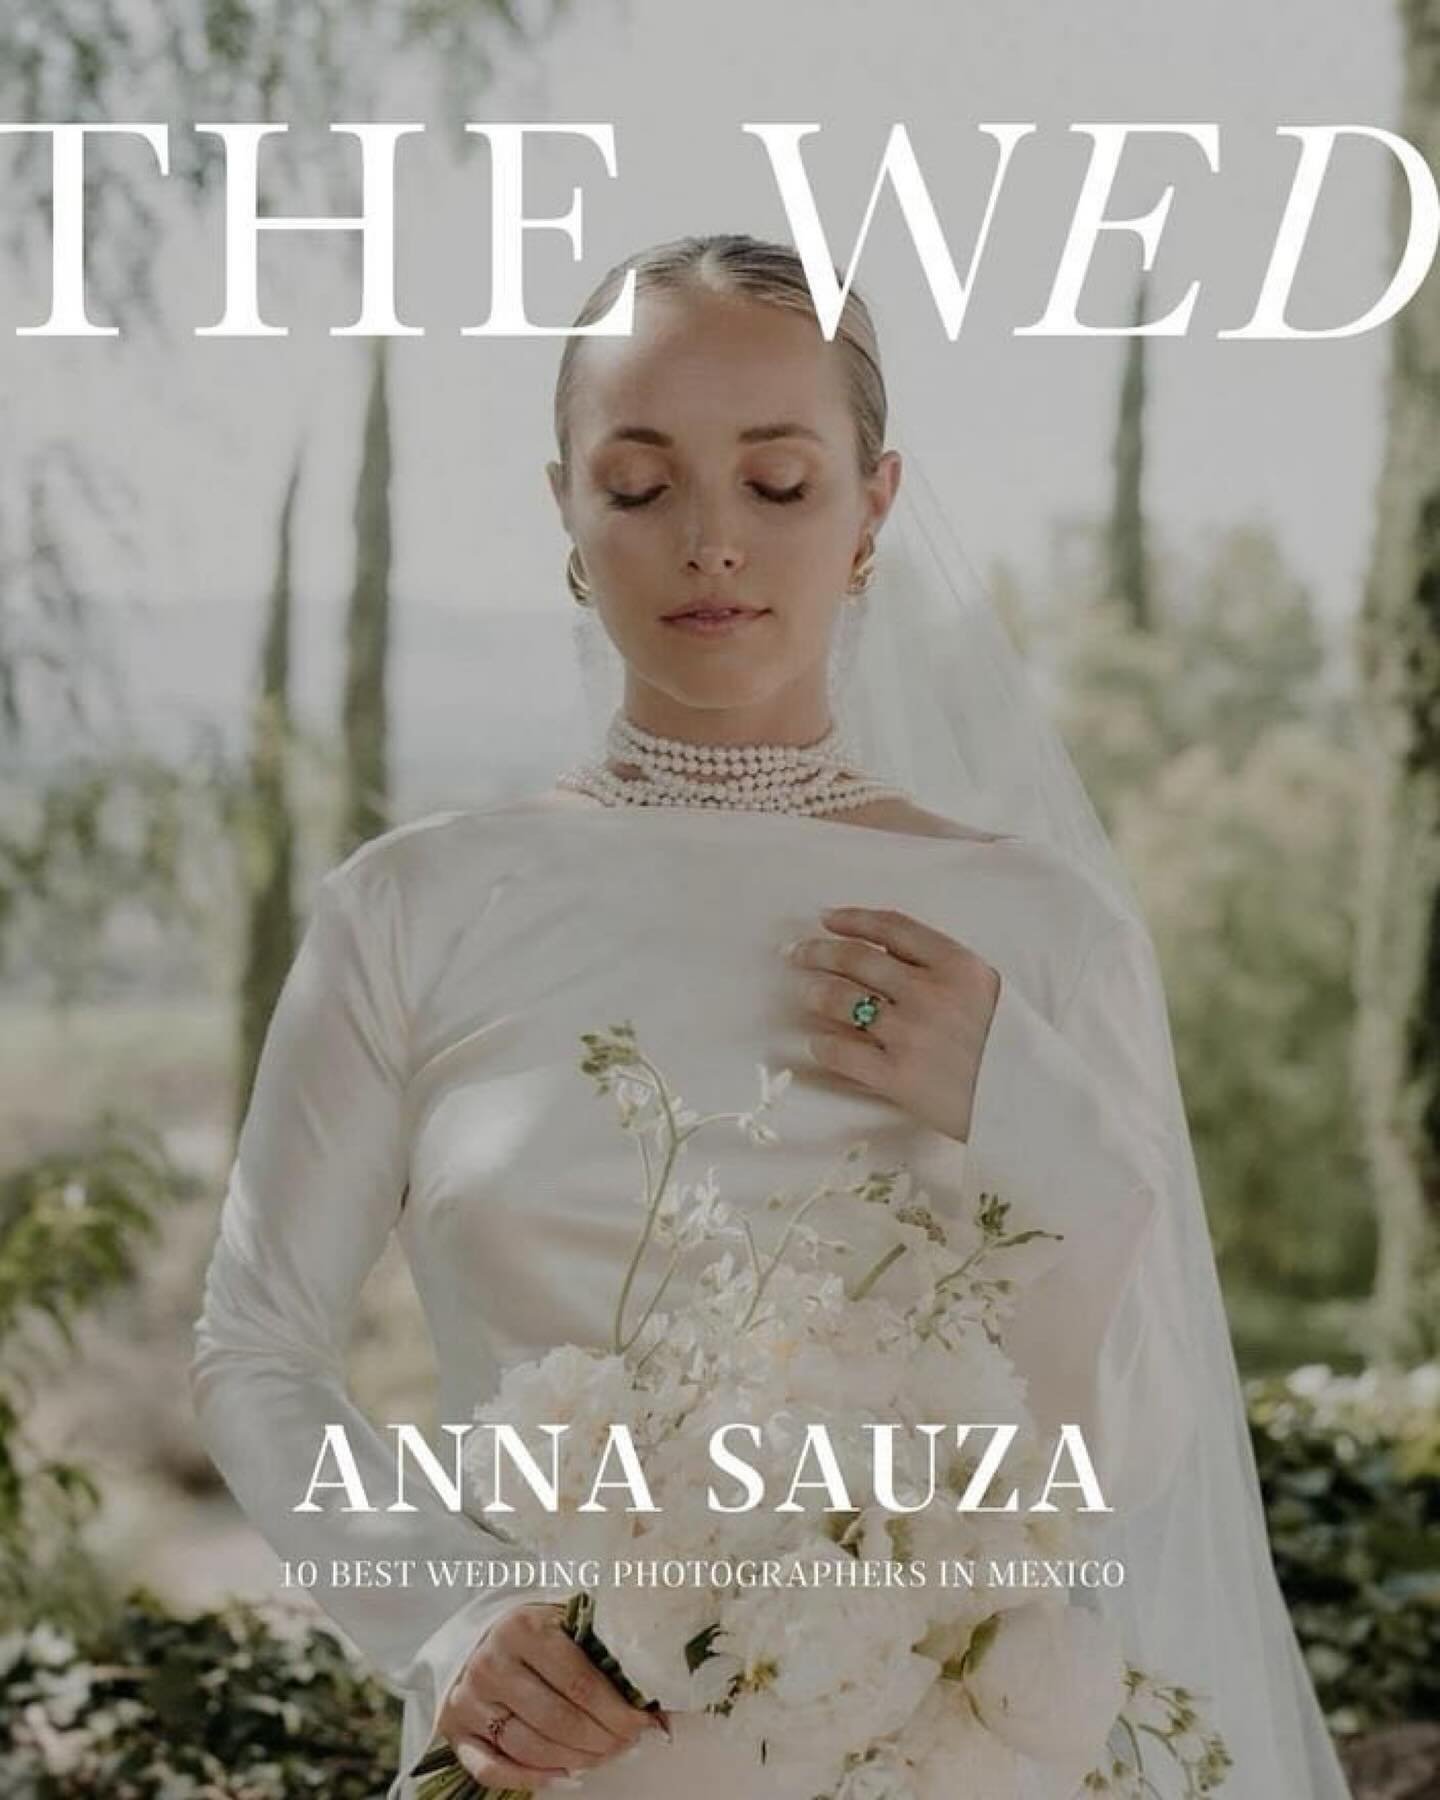 I&rsquo;m super excited and honored to be included in the 10 Best Wedding Photographers in Mexico by THE WED✨!
Thank you @thewed for supporting my work and all my Beautiful clients, let&rsquo;s rock and roll❤️&zwj;🔥

.

.

.

#thewed #mexicoweddingp